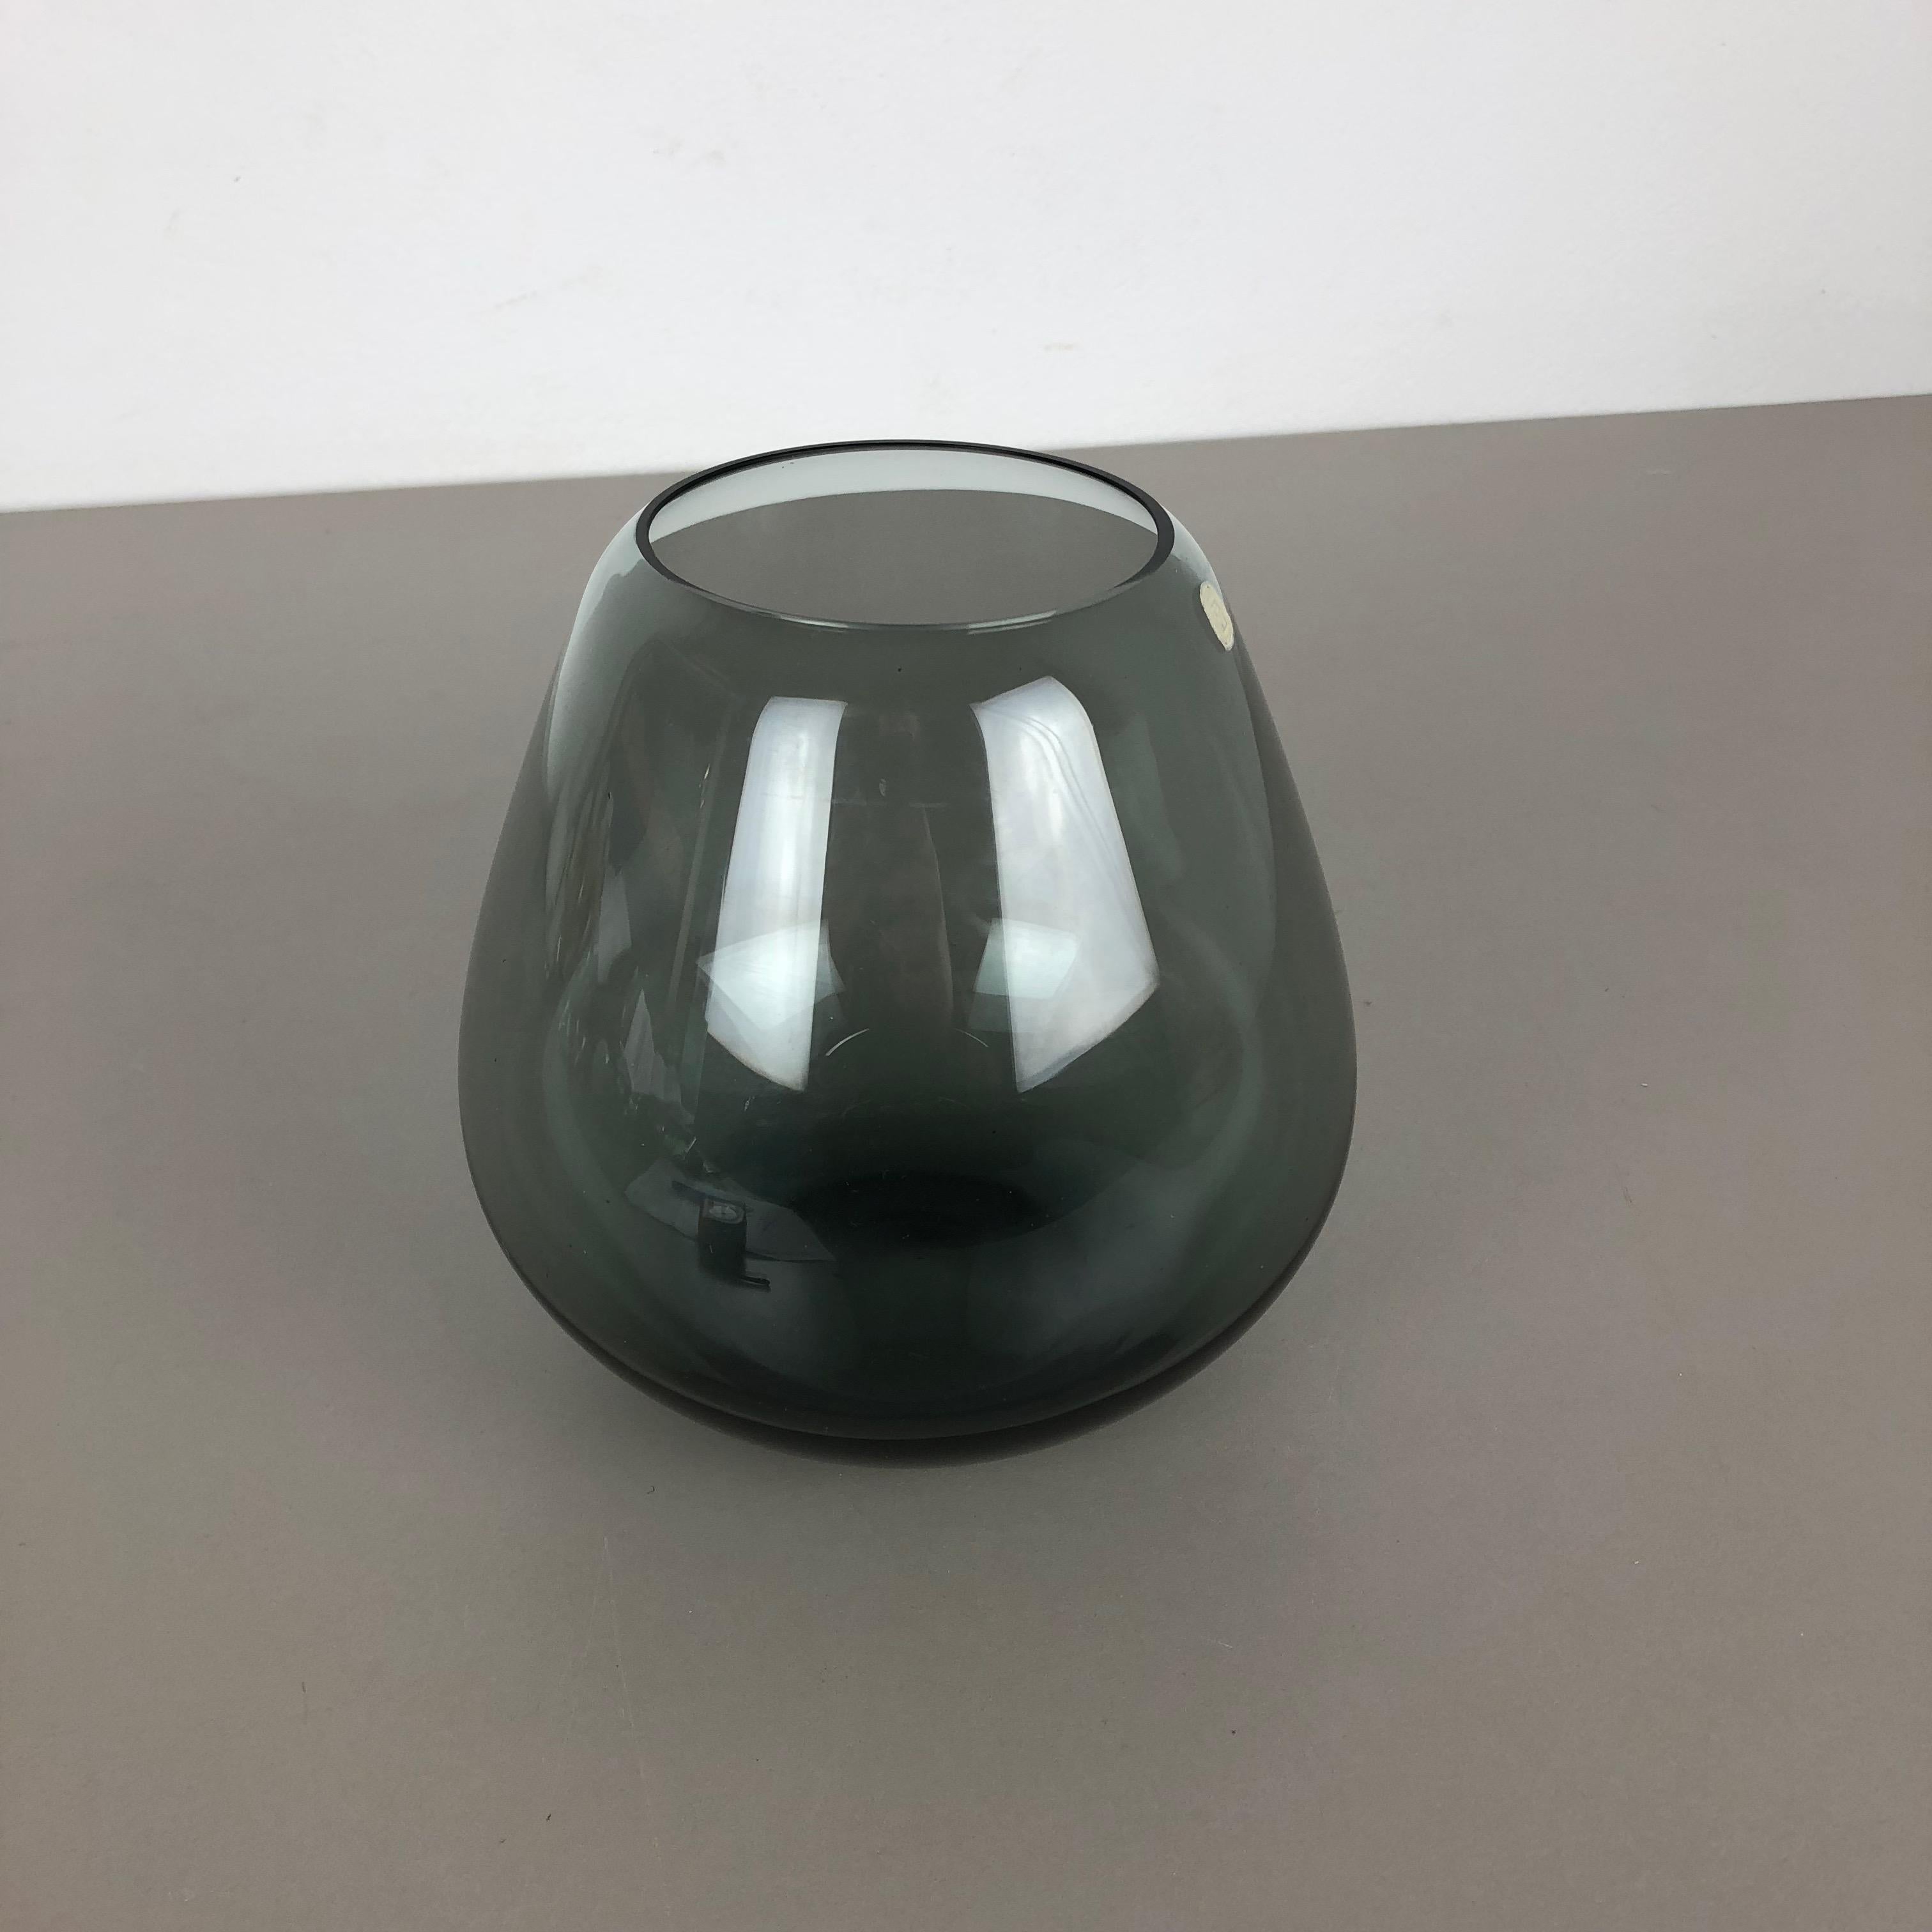 Vintage 1960s Turmalin Vase by Wilhelm Wagenfeld for WMF, Germany Bauhaus For Sale 2